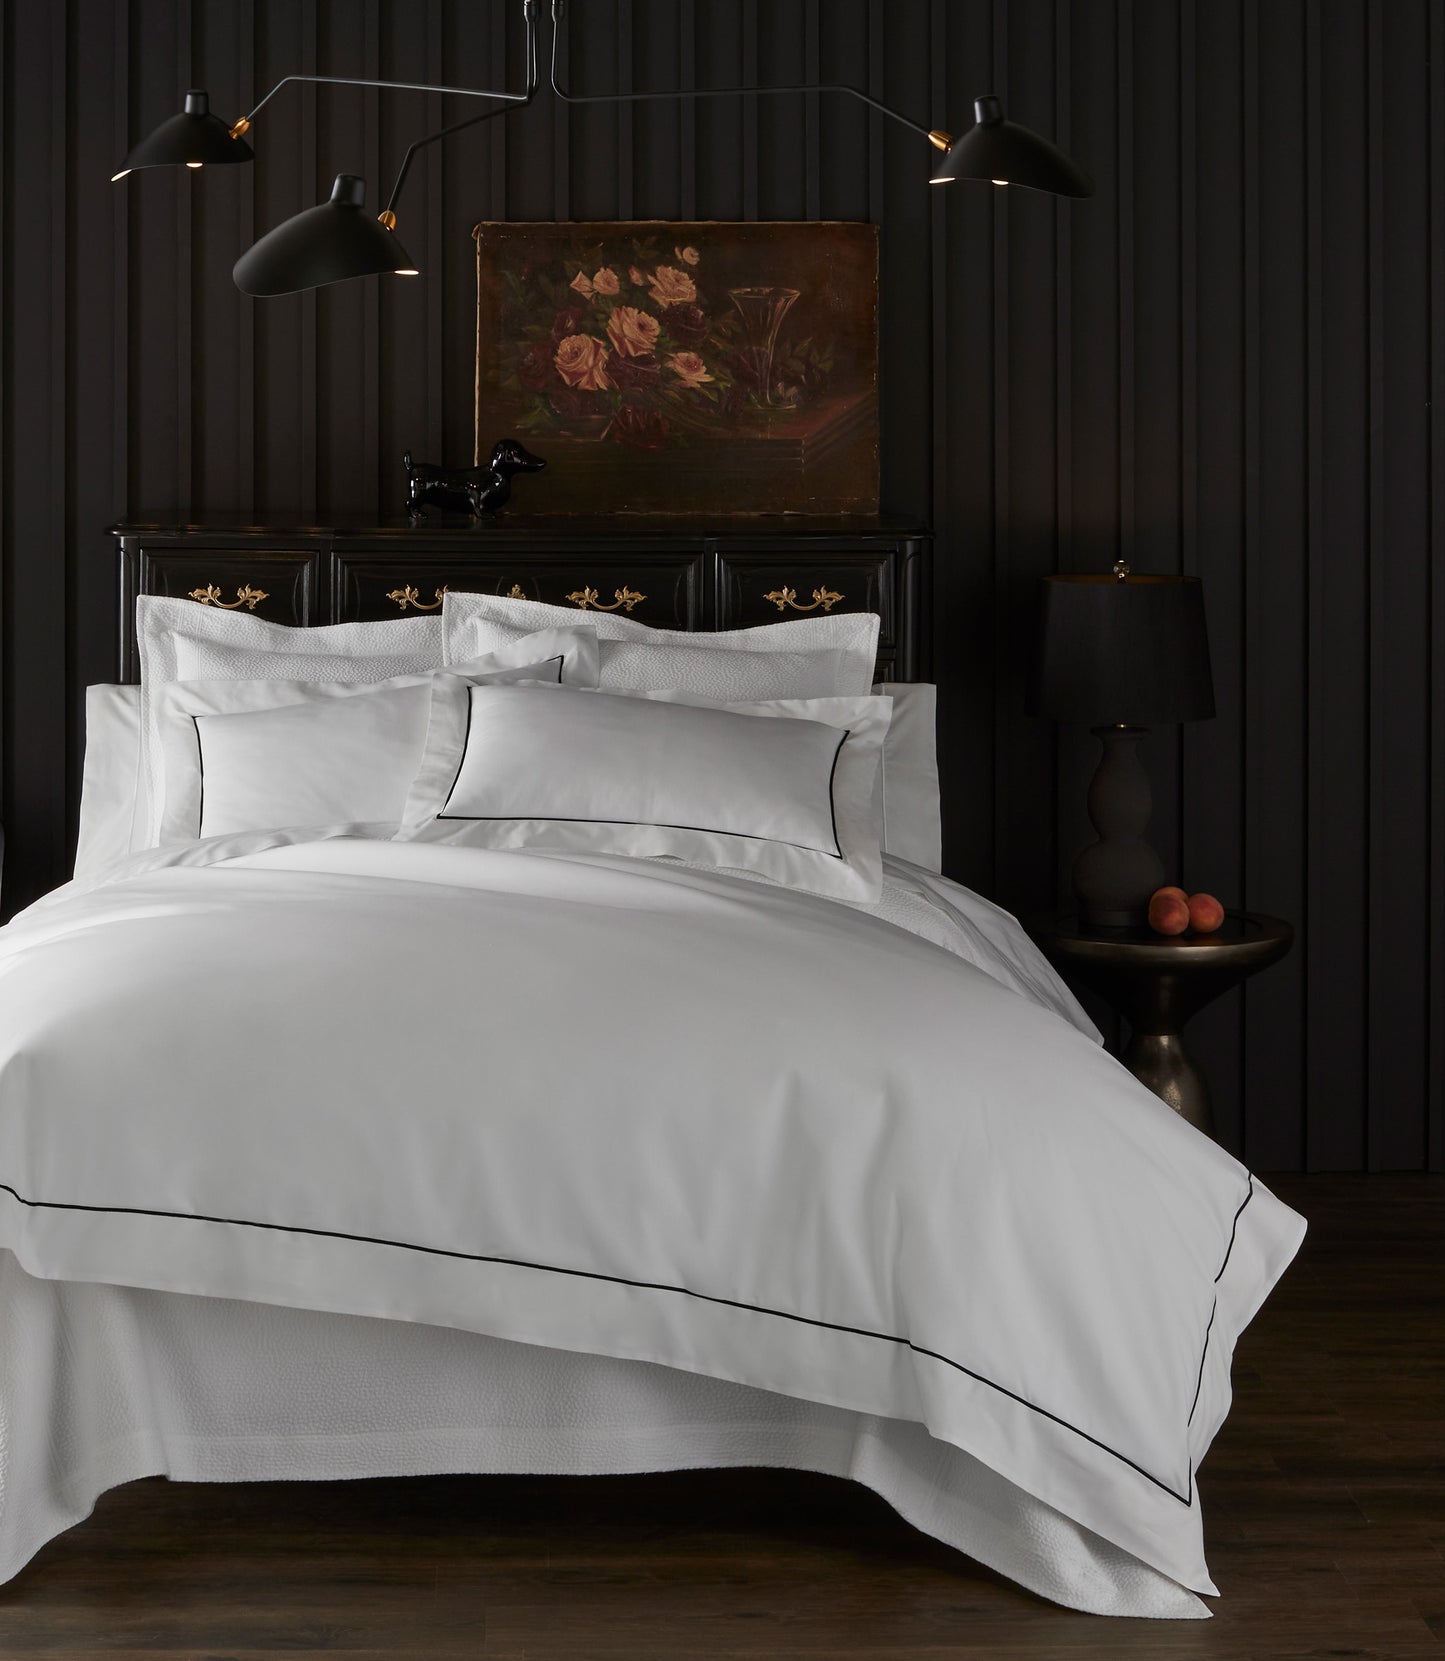 Boutique Percale Duvet Cover in Black in a Bedroom